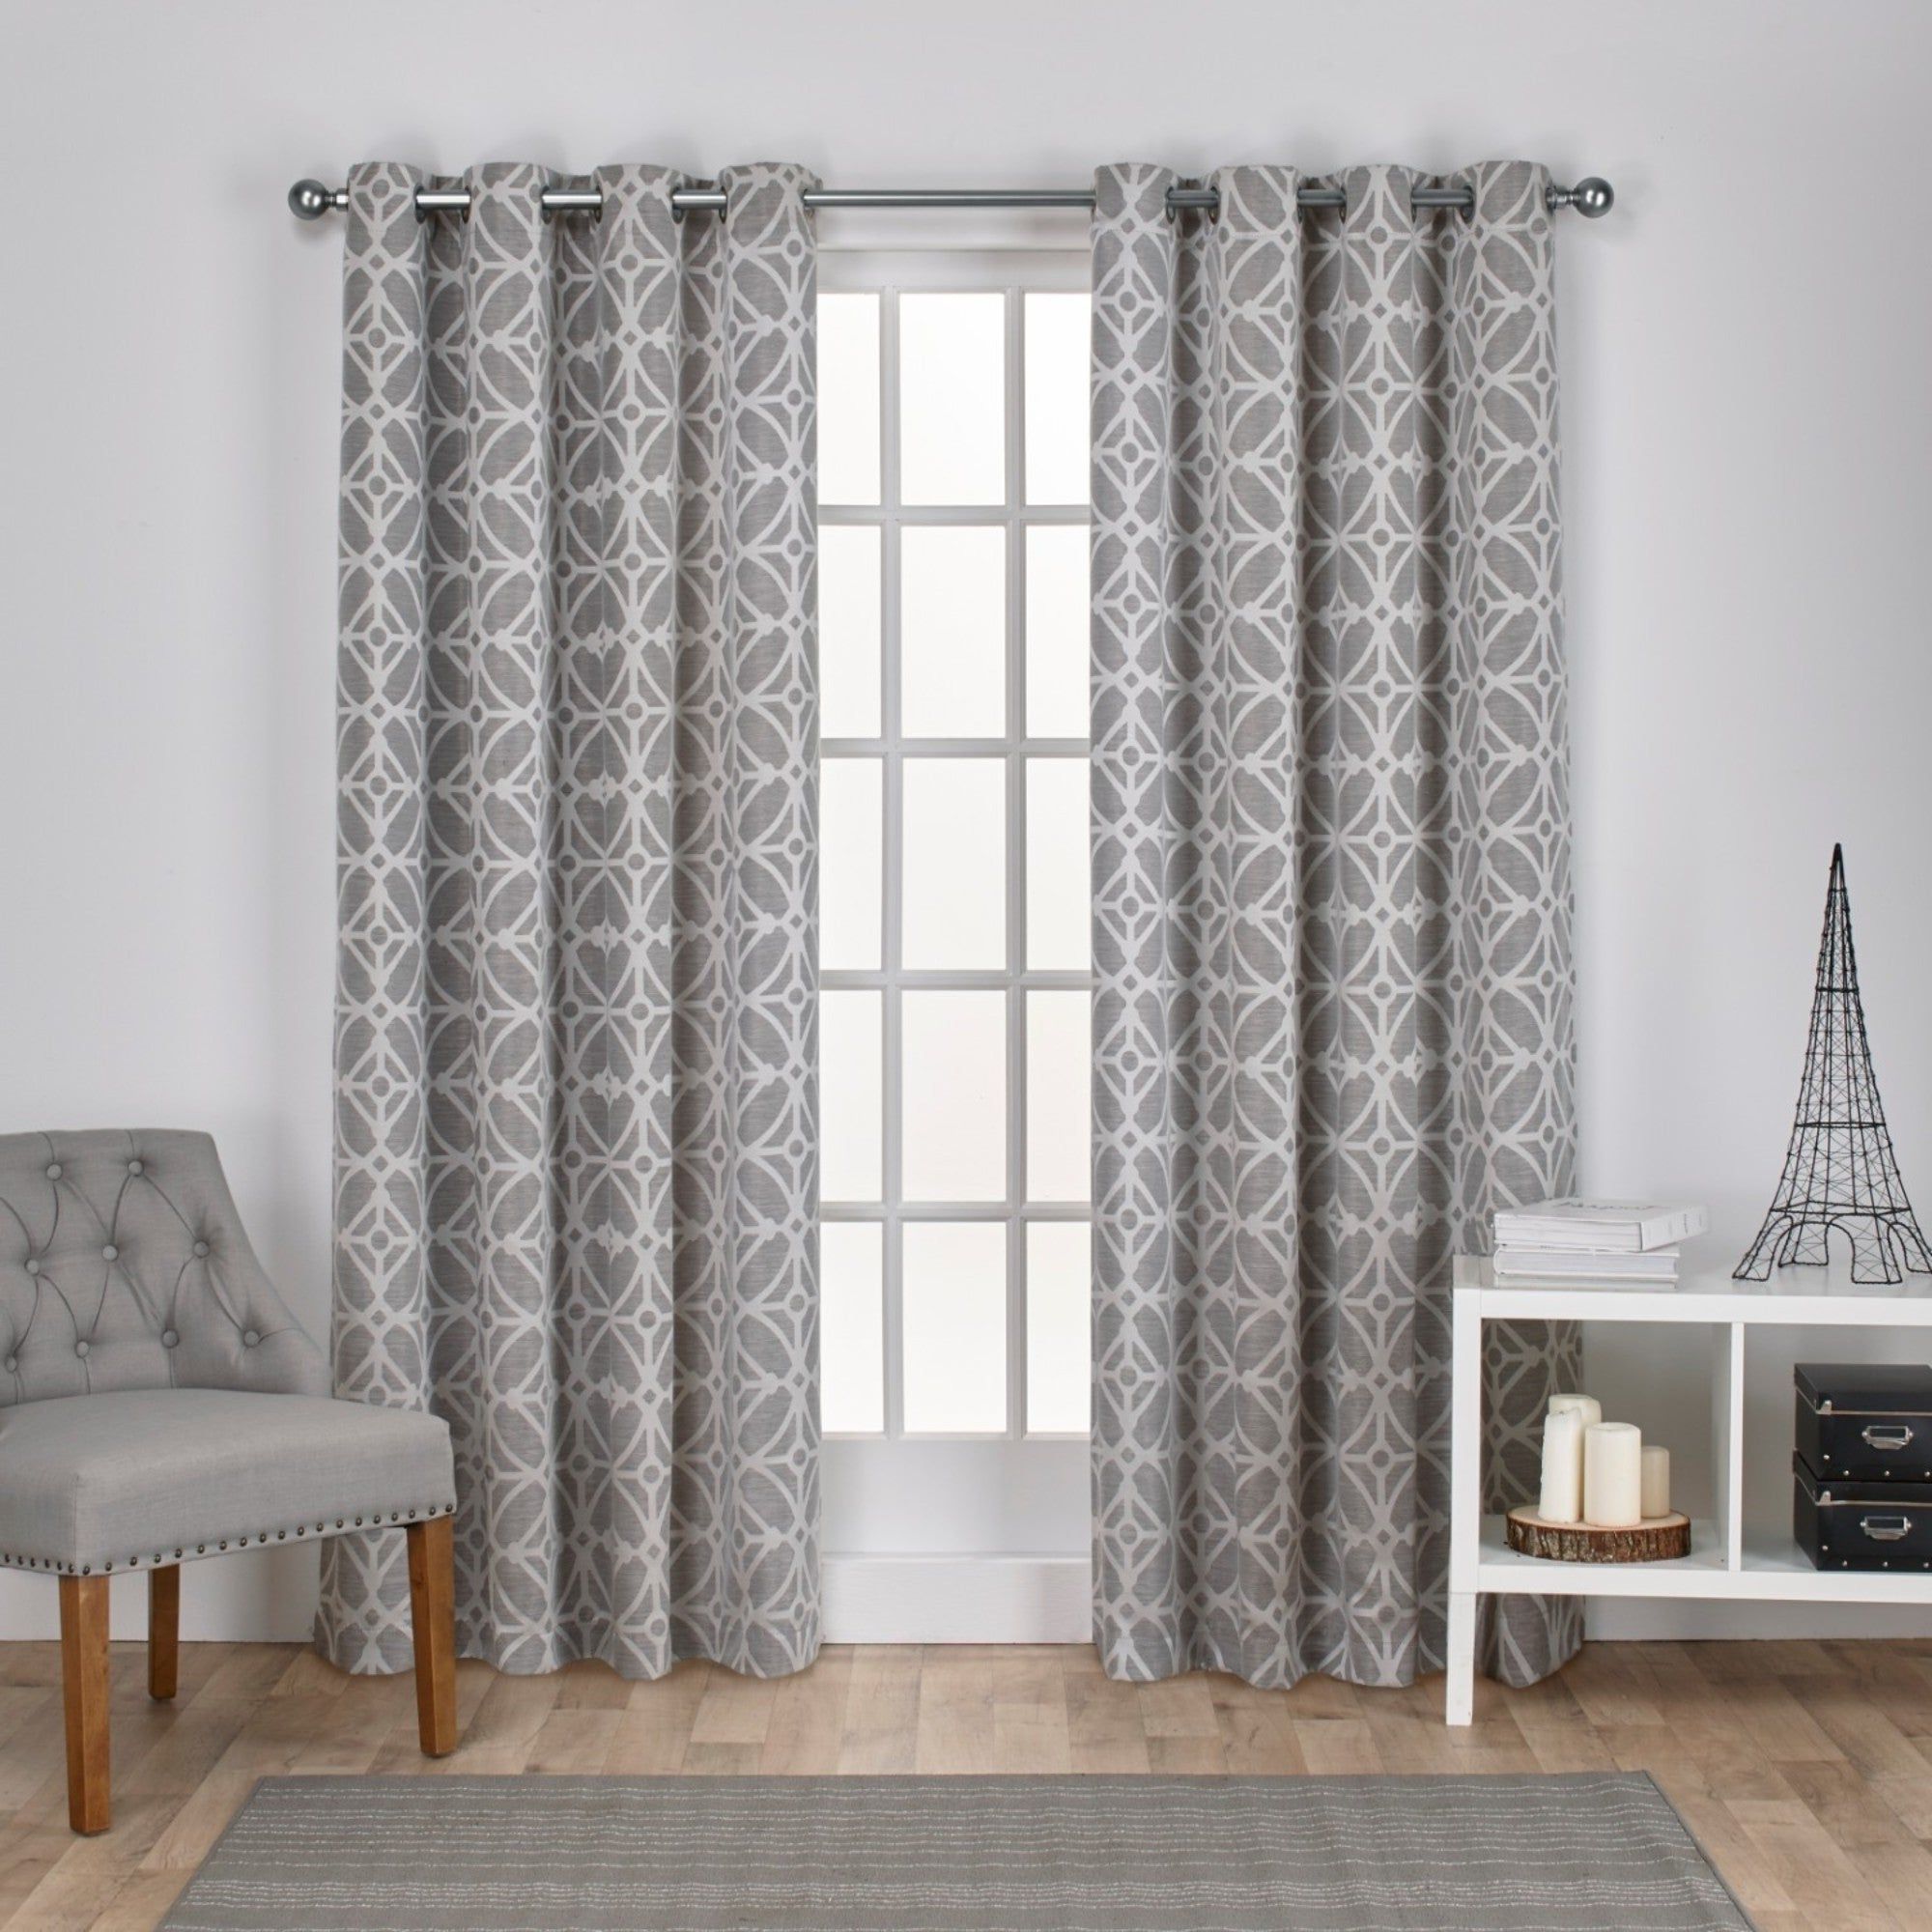 Featured Photo of The Curated Nomad Duane Jacquard Grommet Top Curtain Panel Pairs